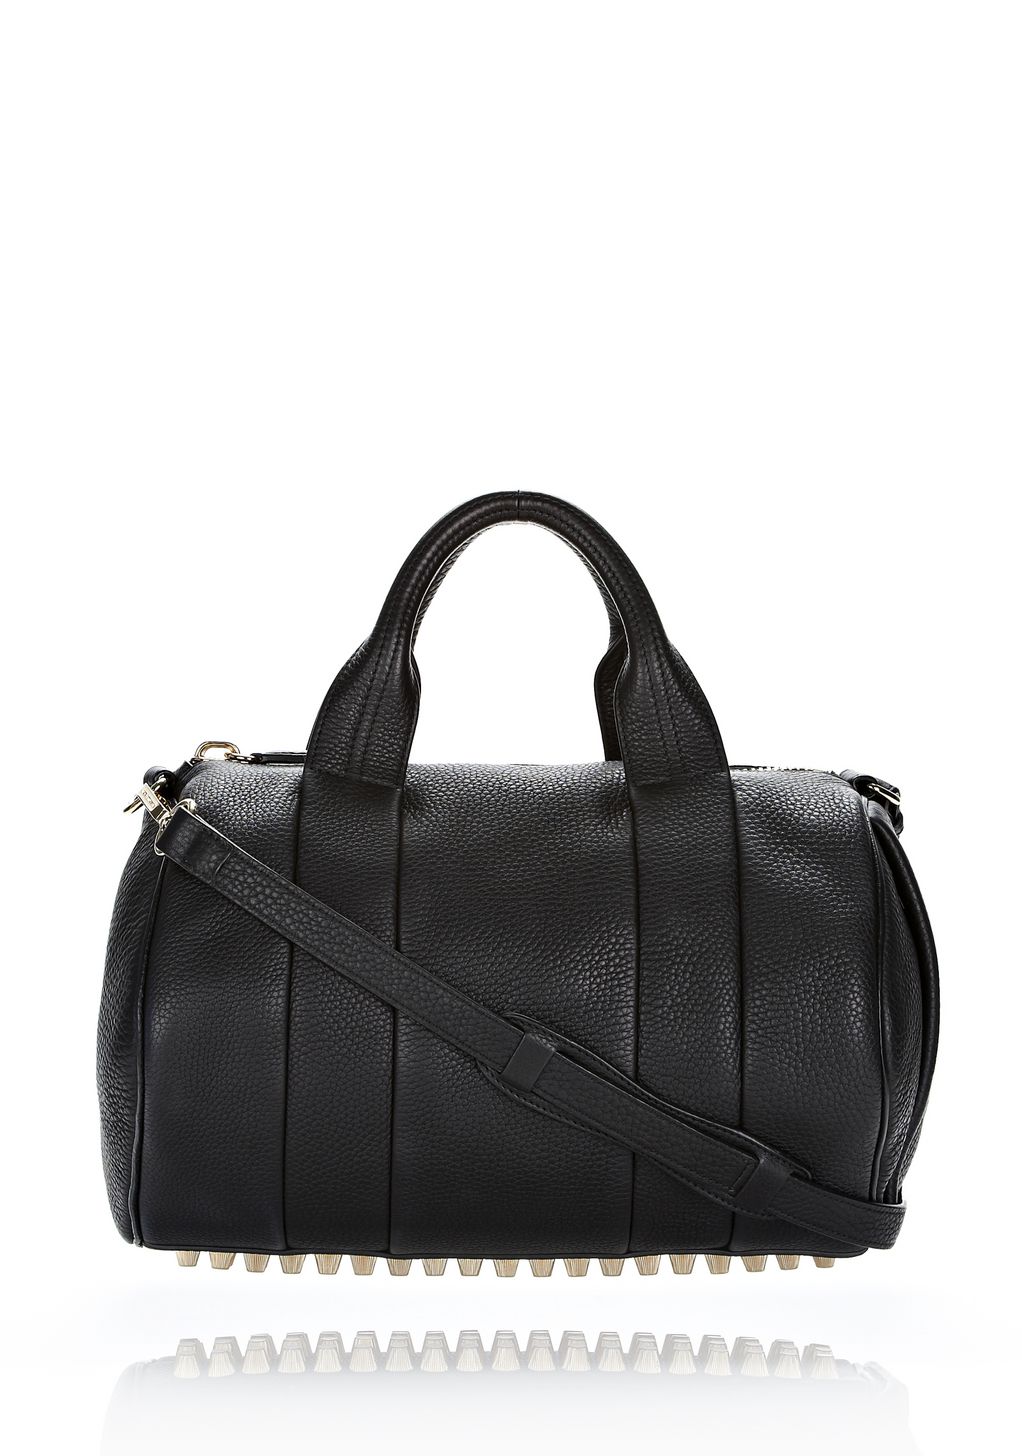 Alexander Wang ‎ROCCO IN SOFT BLACK WITH PALE GOLD ‎ ‎Shoulder Bag ...